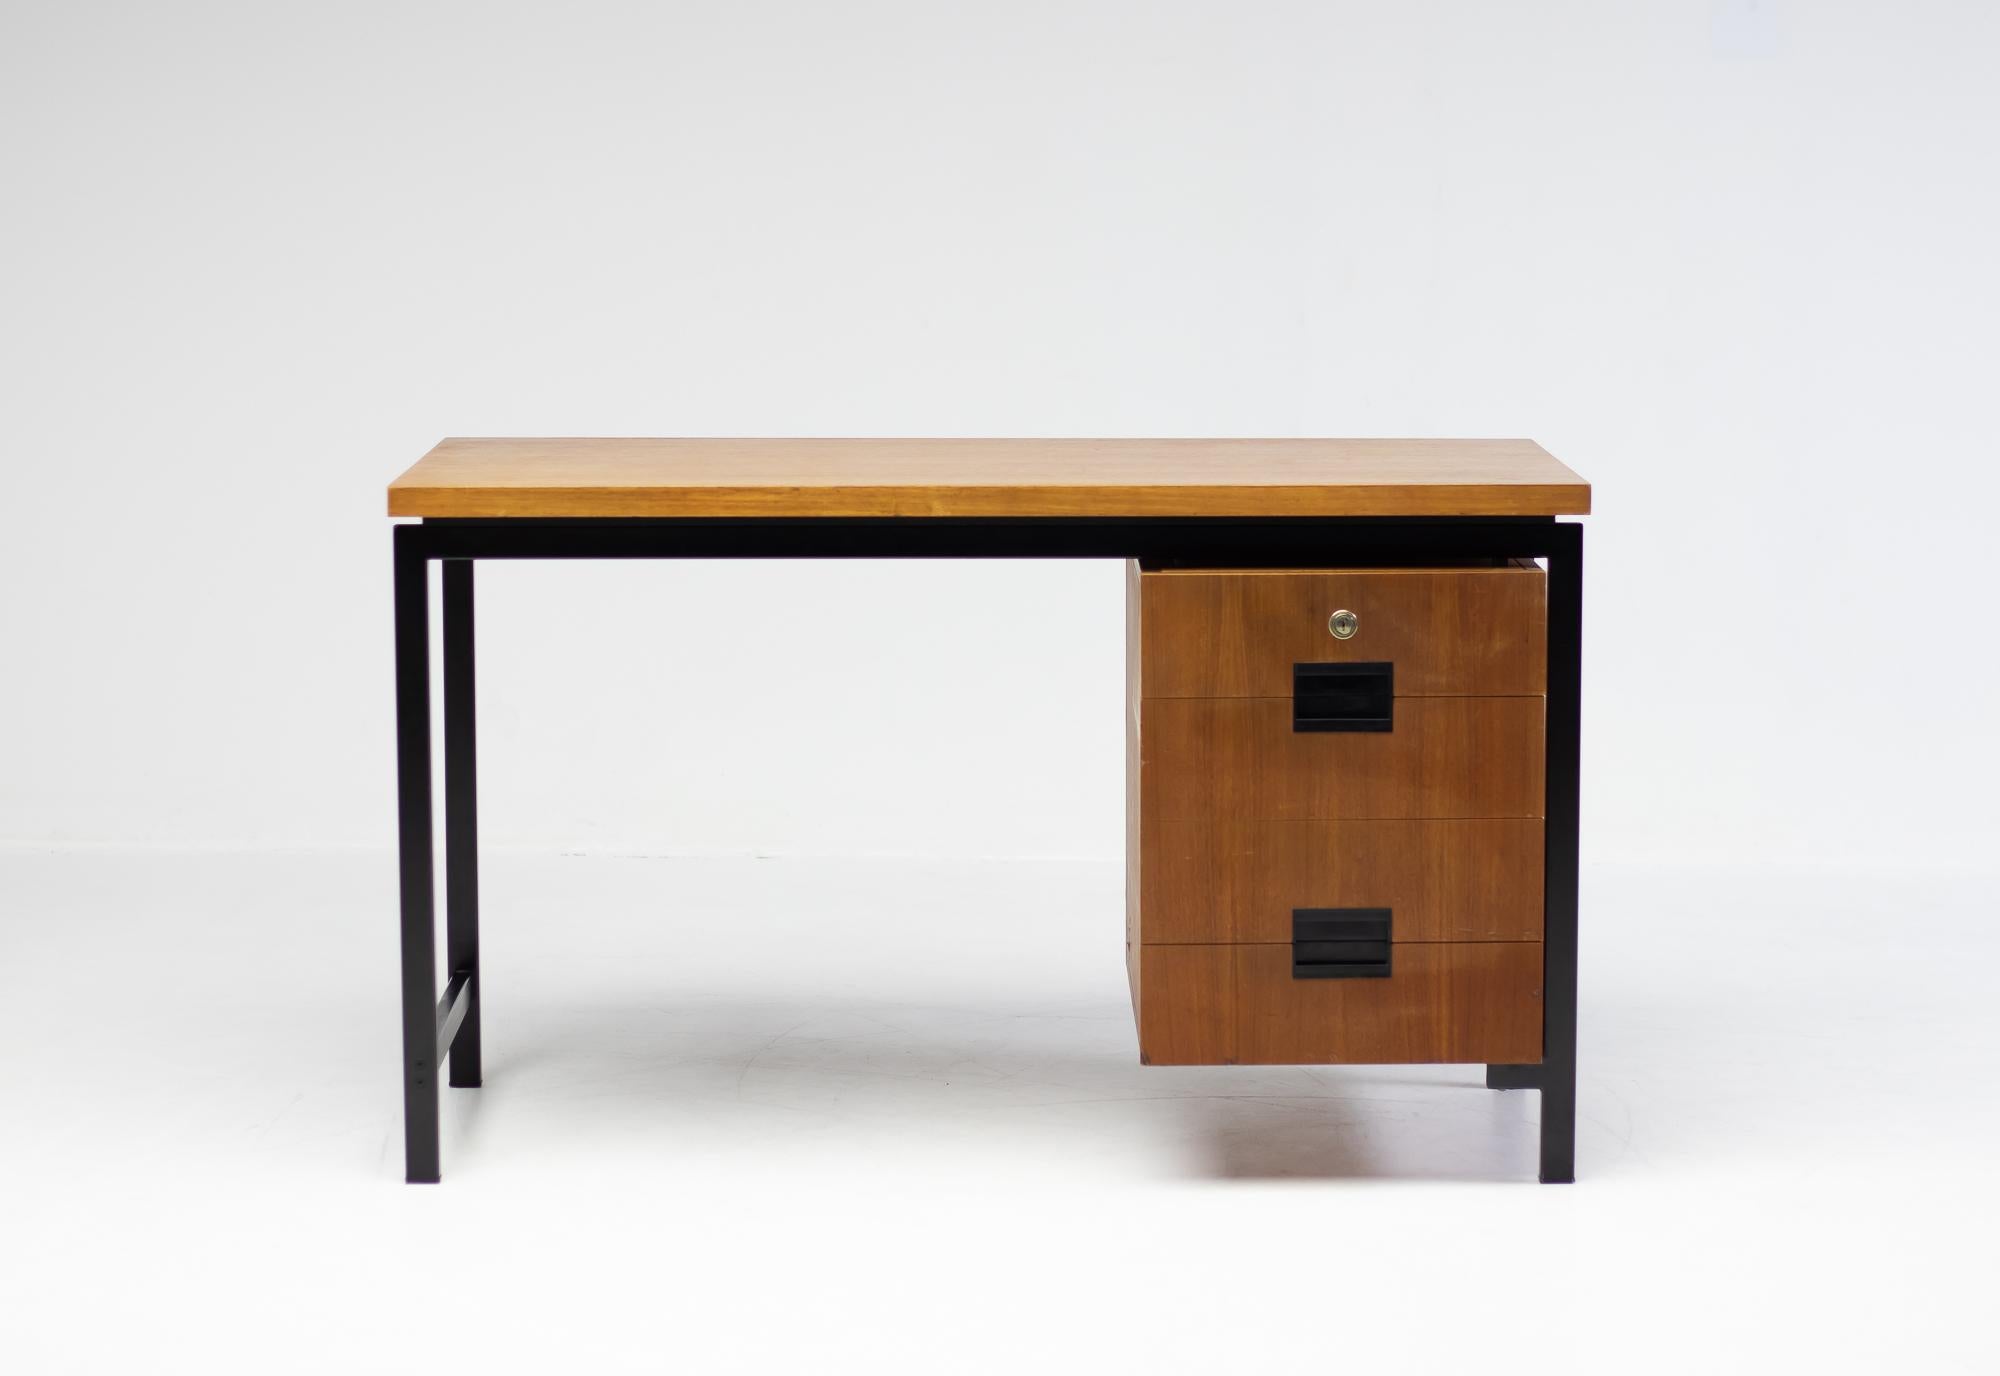 Elegant EU-01 desk from U+N series in teak, designed by Cees Braakman for Pastoe in 1958. 
Drawers with the renown teak bent plywood interior. 
The desk is marked with the Pastoe silver label.